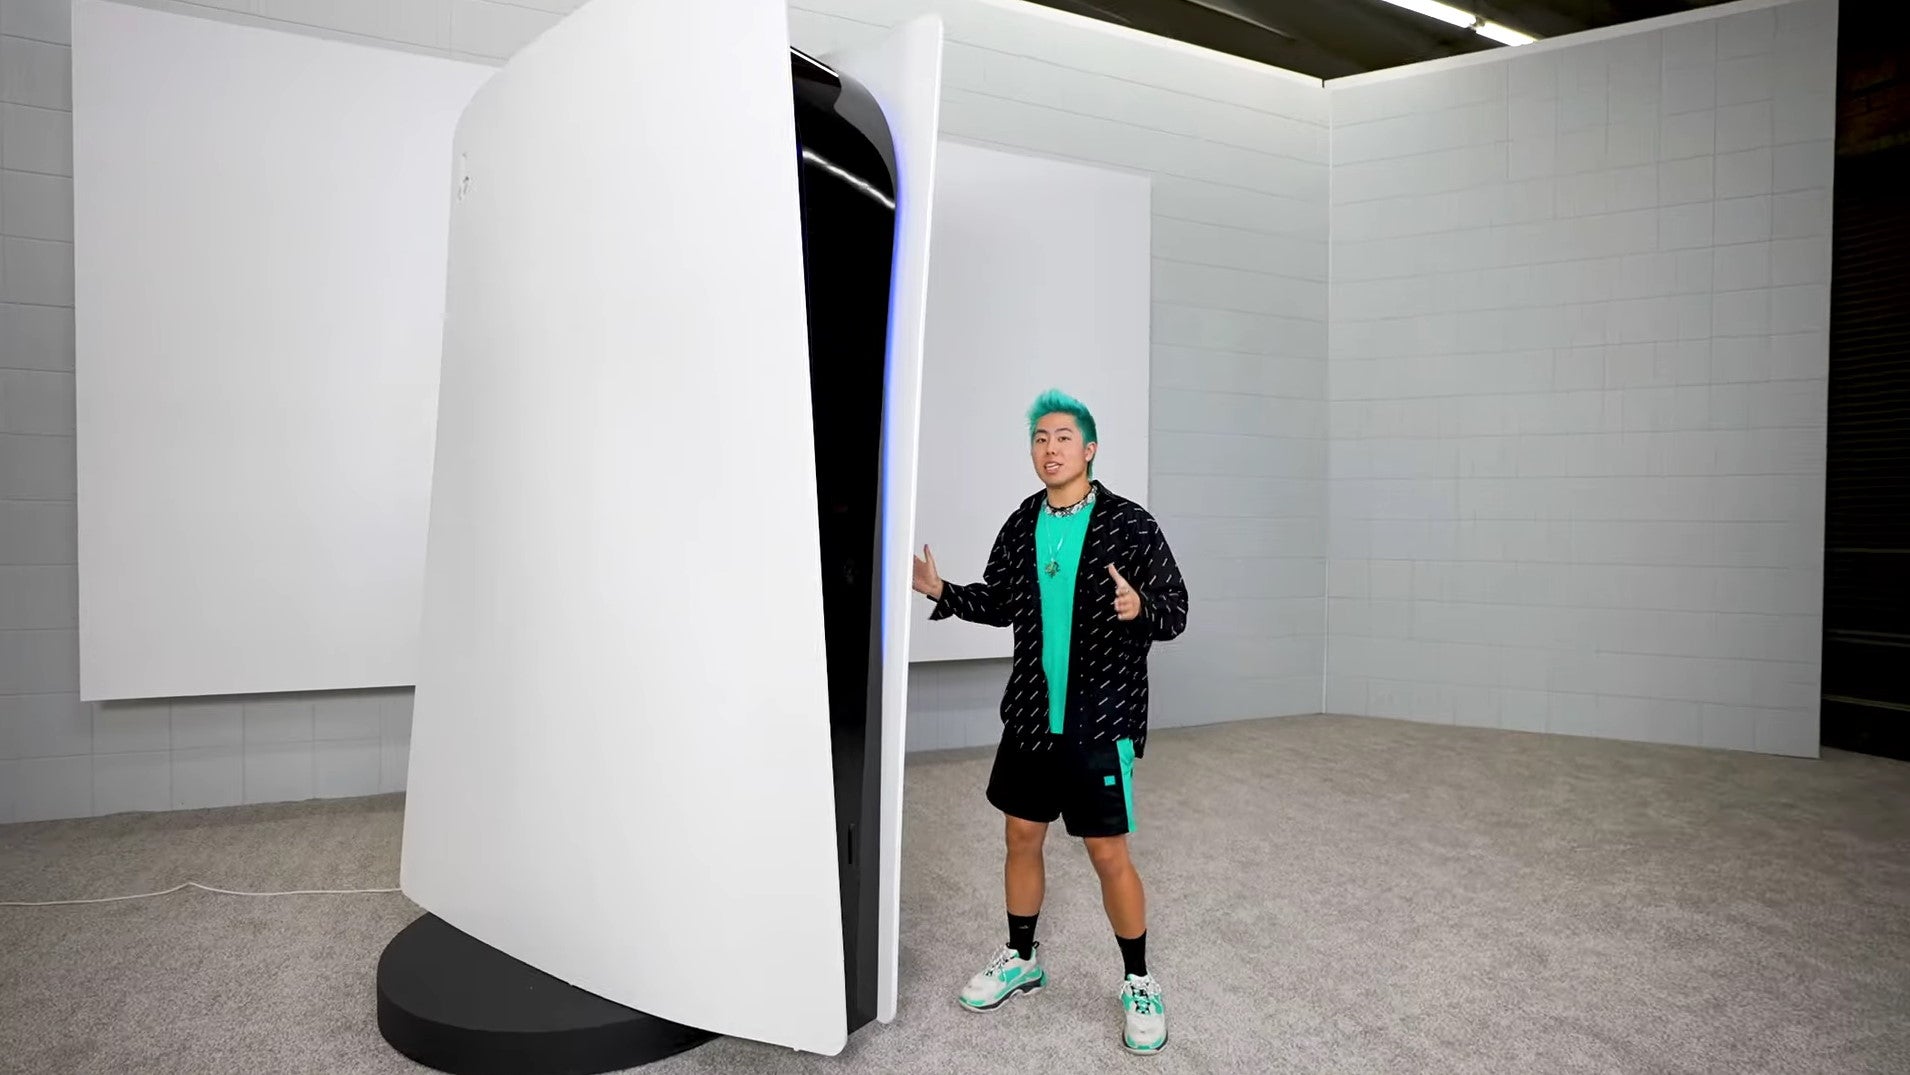 A man stands next to a 10ft tall PlayStation 5